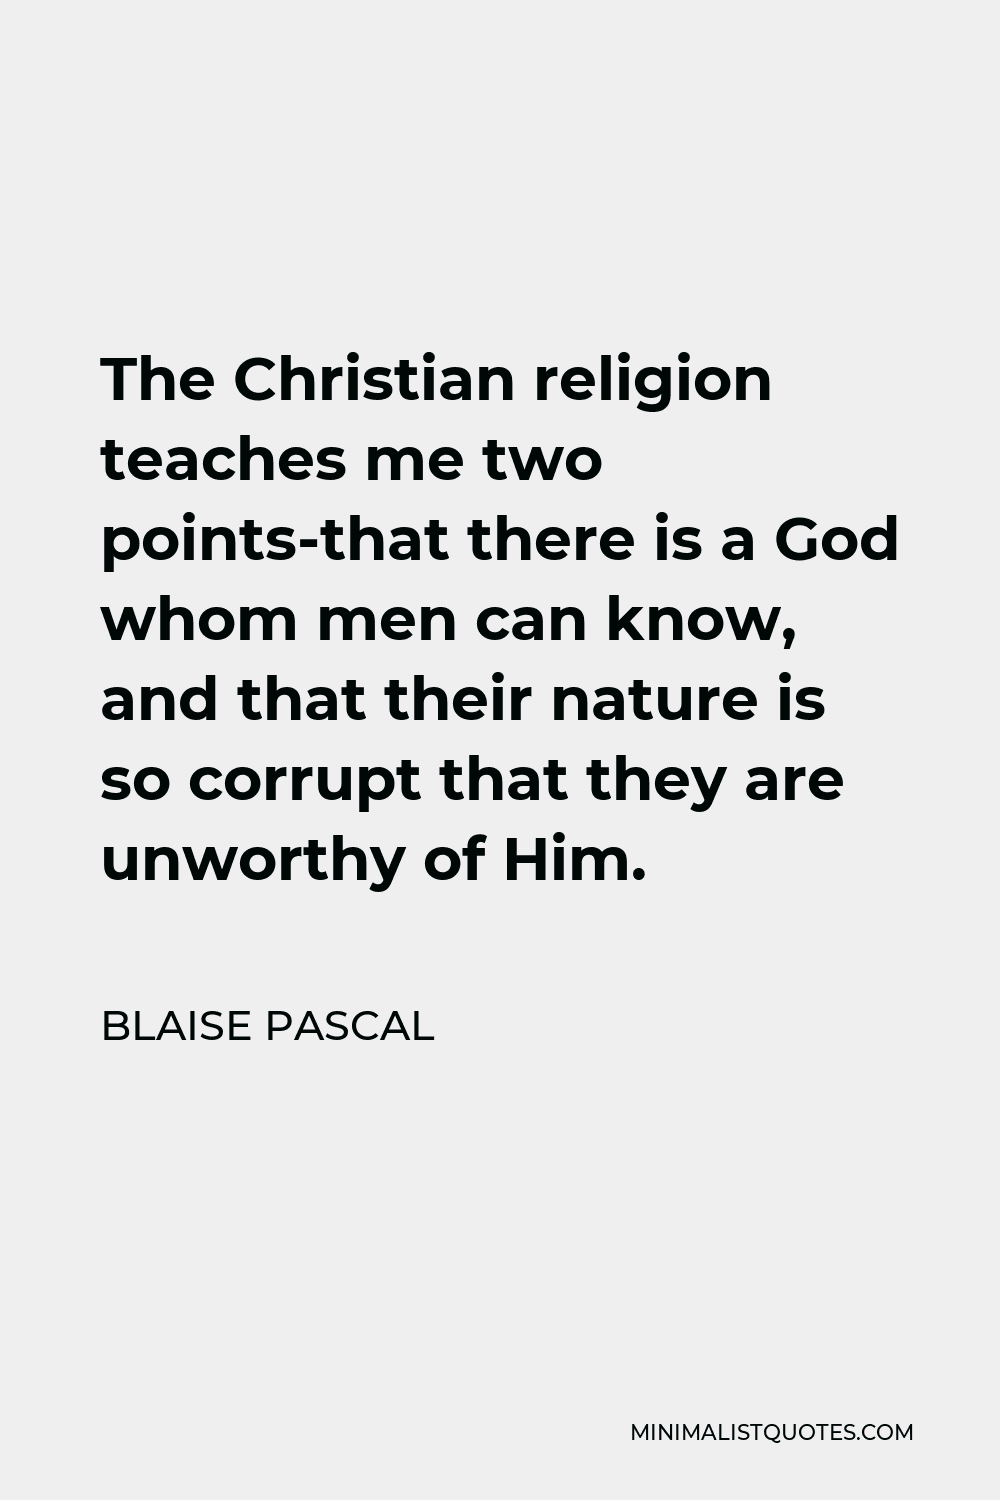 Blaise Pascal Quote - The Christian religion teaches me two points-that there is a God whom men can know, and that their nature is so corrupt that they are unworthy of Him.